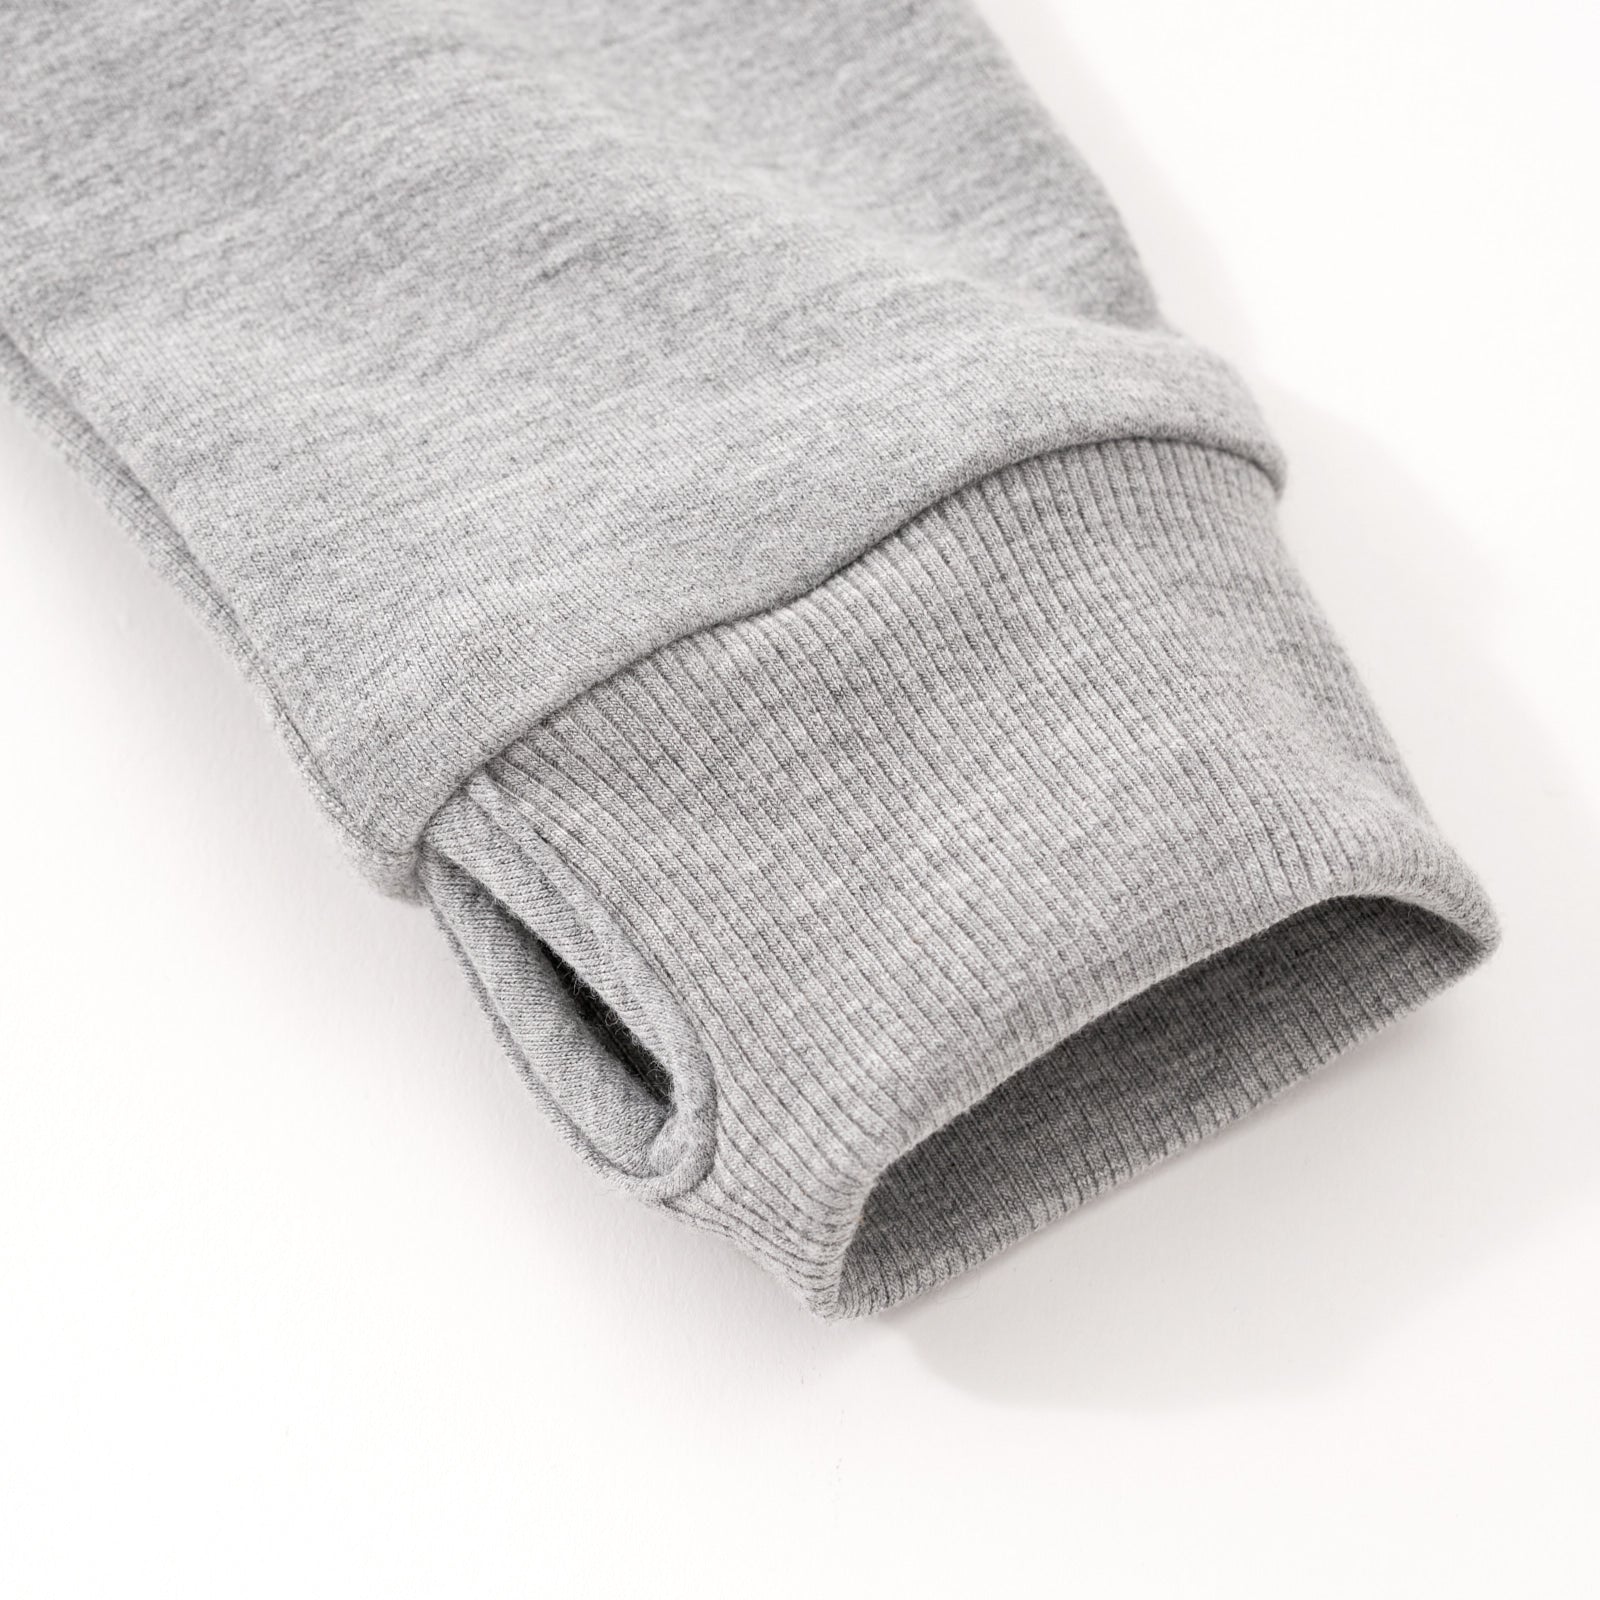 Close up image of the thumb hole detail on the sleeve of the Midwash Blue/Gray Denim Jacket